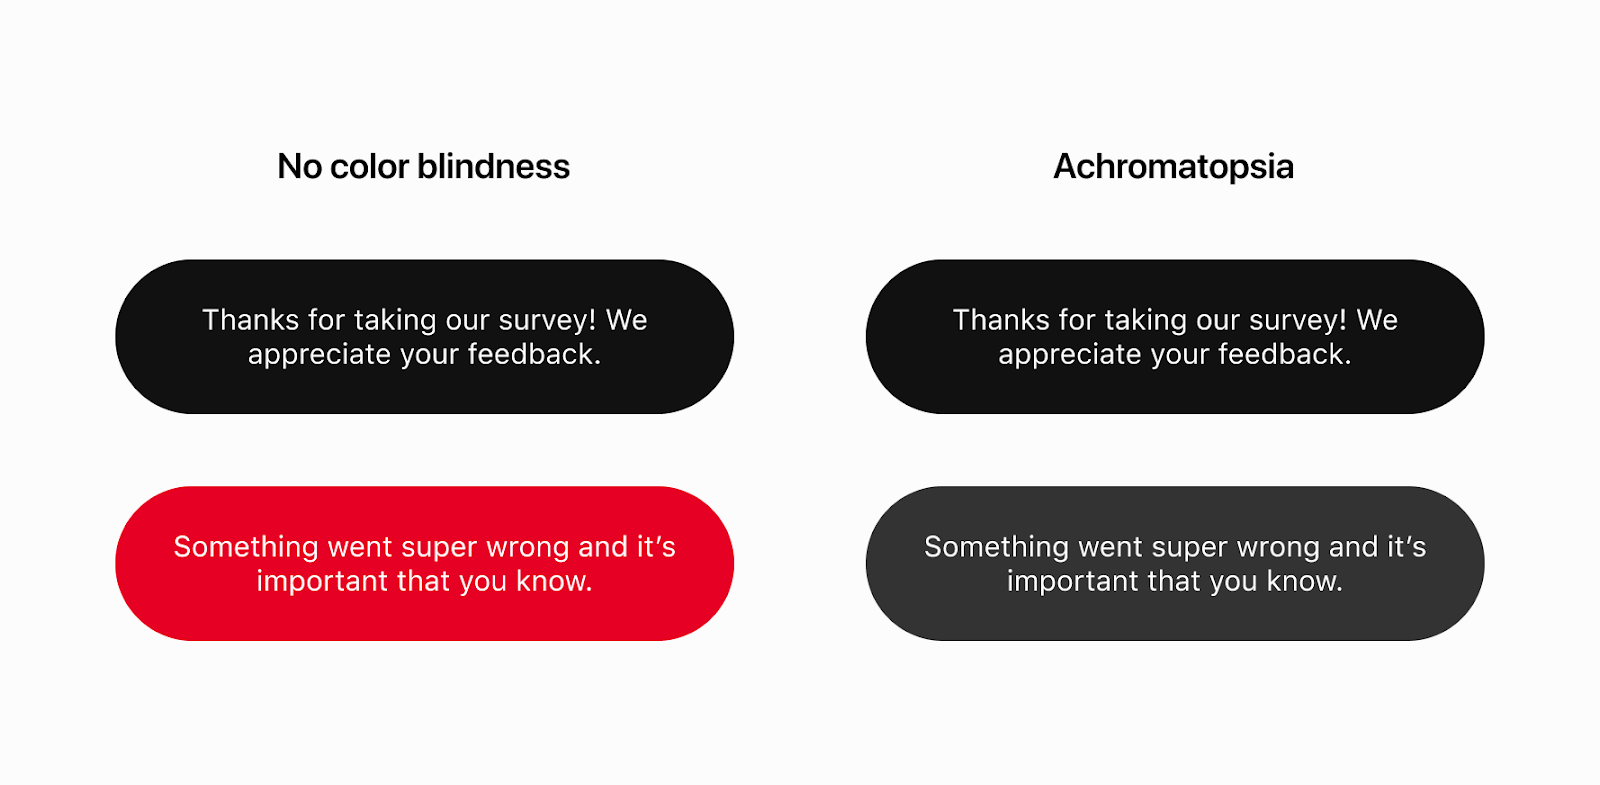 Pinterest Toasts with color blindness